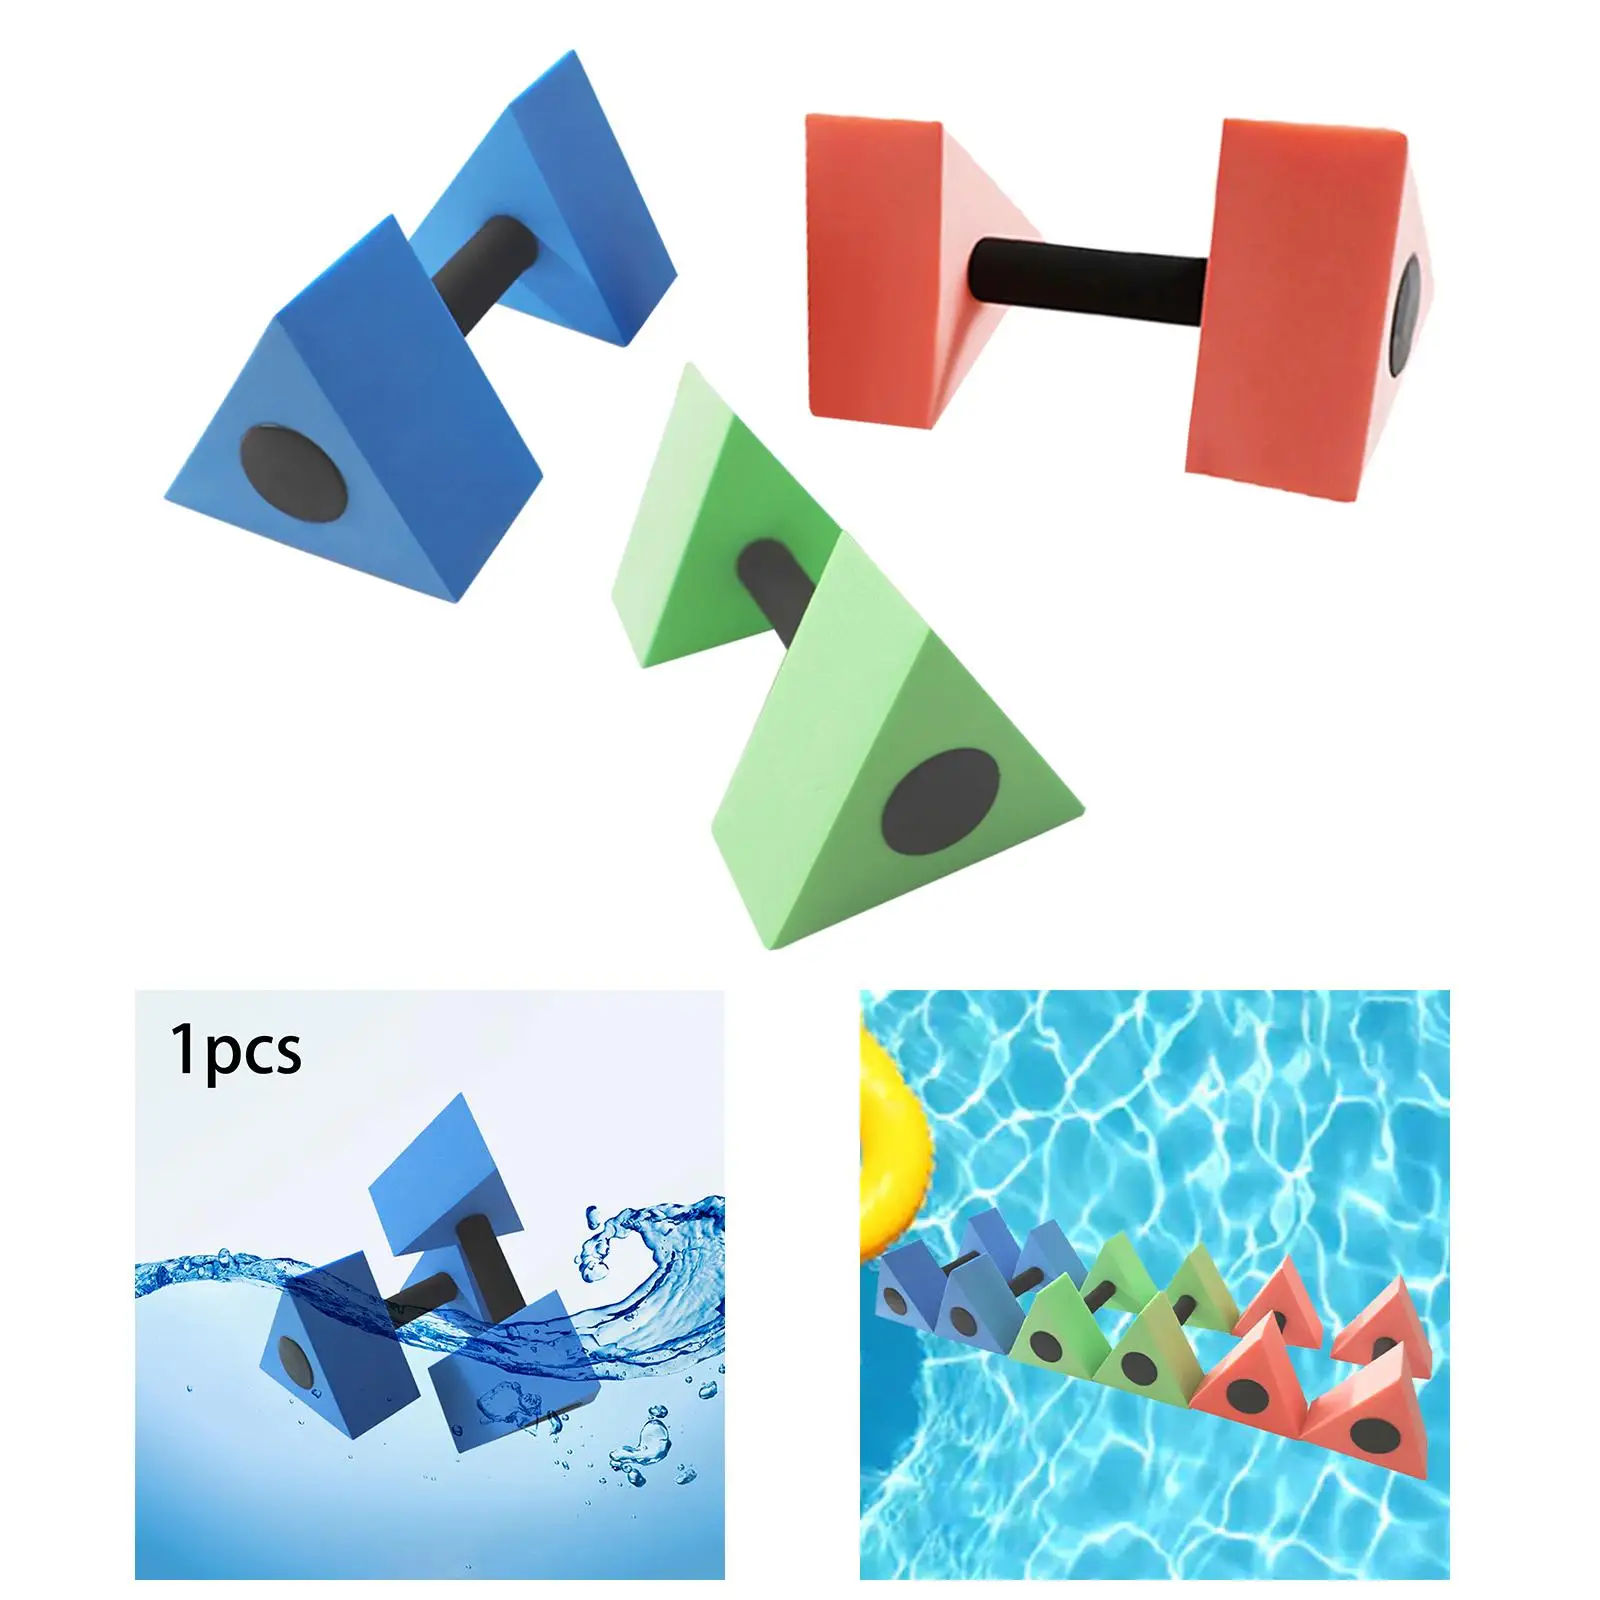 Aquatic Dumbbell Triangular Aquatic Exercise Dumbbells Triangle Water Floating Dumbbells Hand Bar for Water Sports